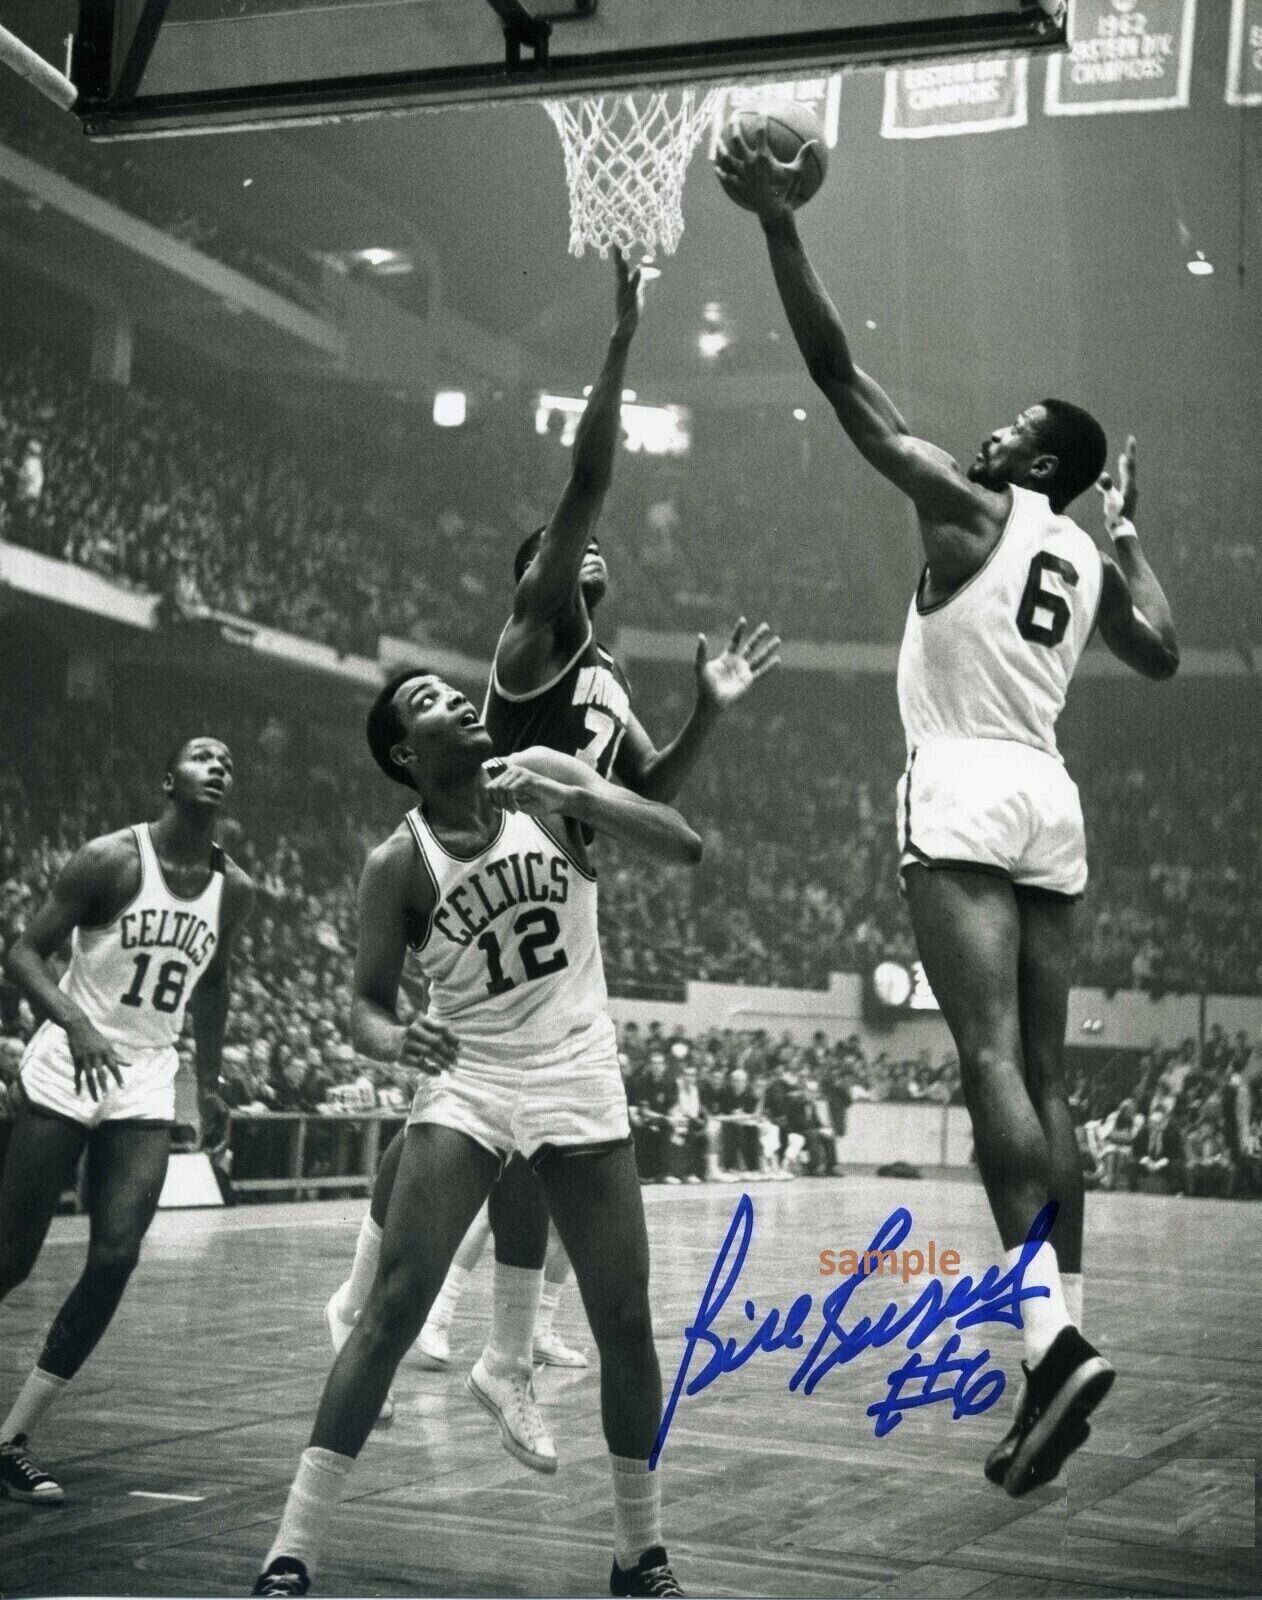 Bill Russell Reprint Photo 8x10 Signed Autographed Man Cave Gift Boston Celtics